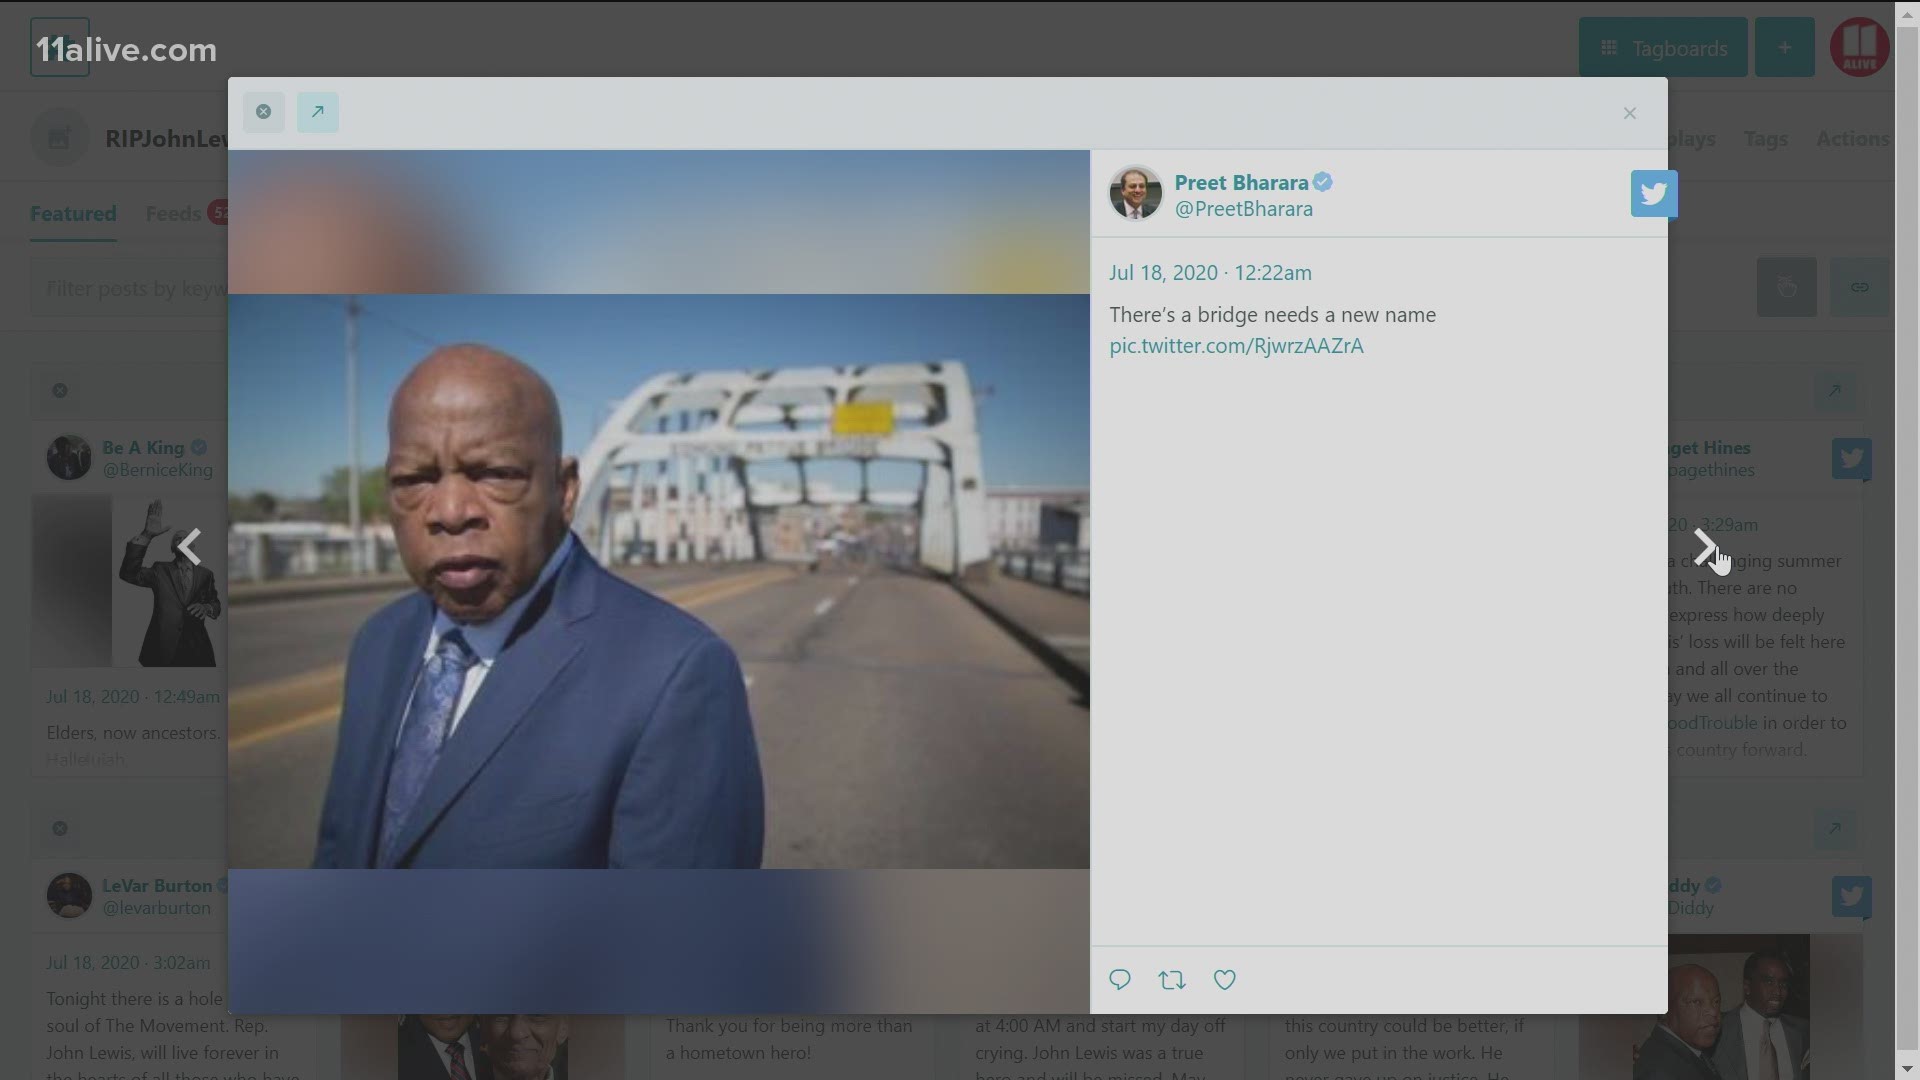 Tributes are beginning to come in on social media in memory of John Lewis from around the world and from his home in Atlanta.